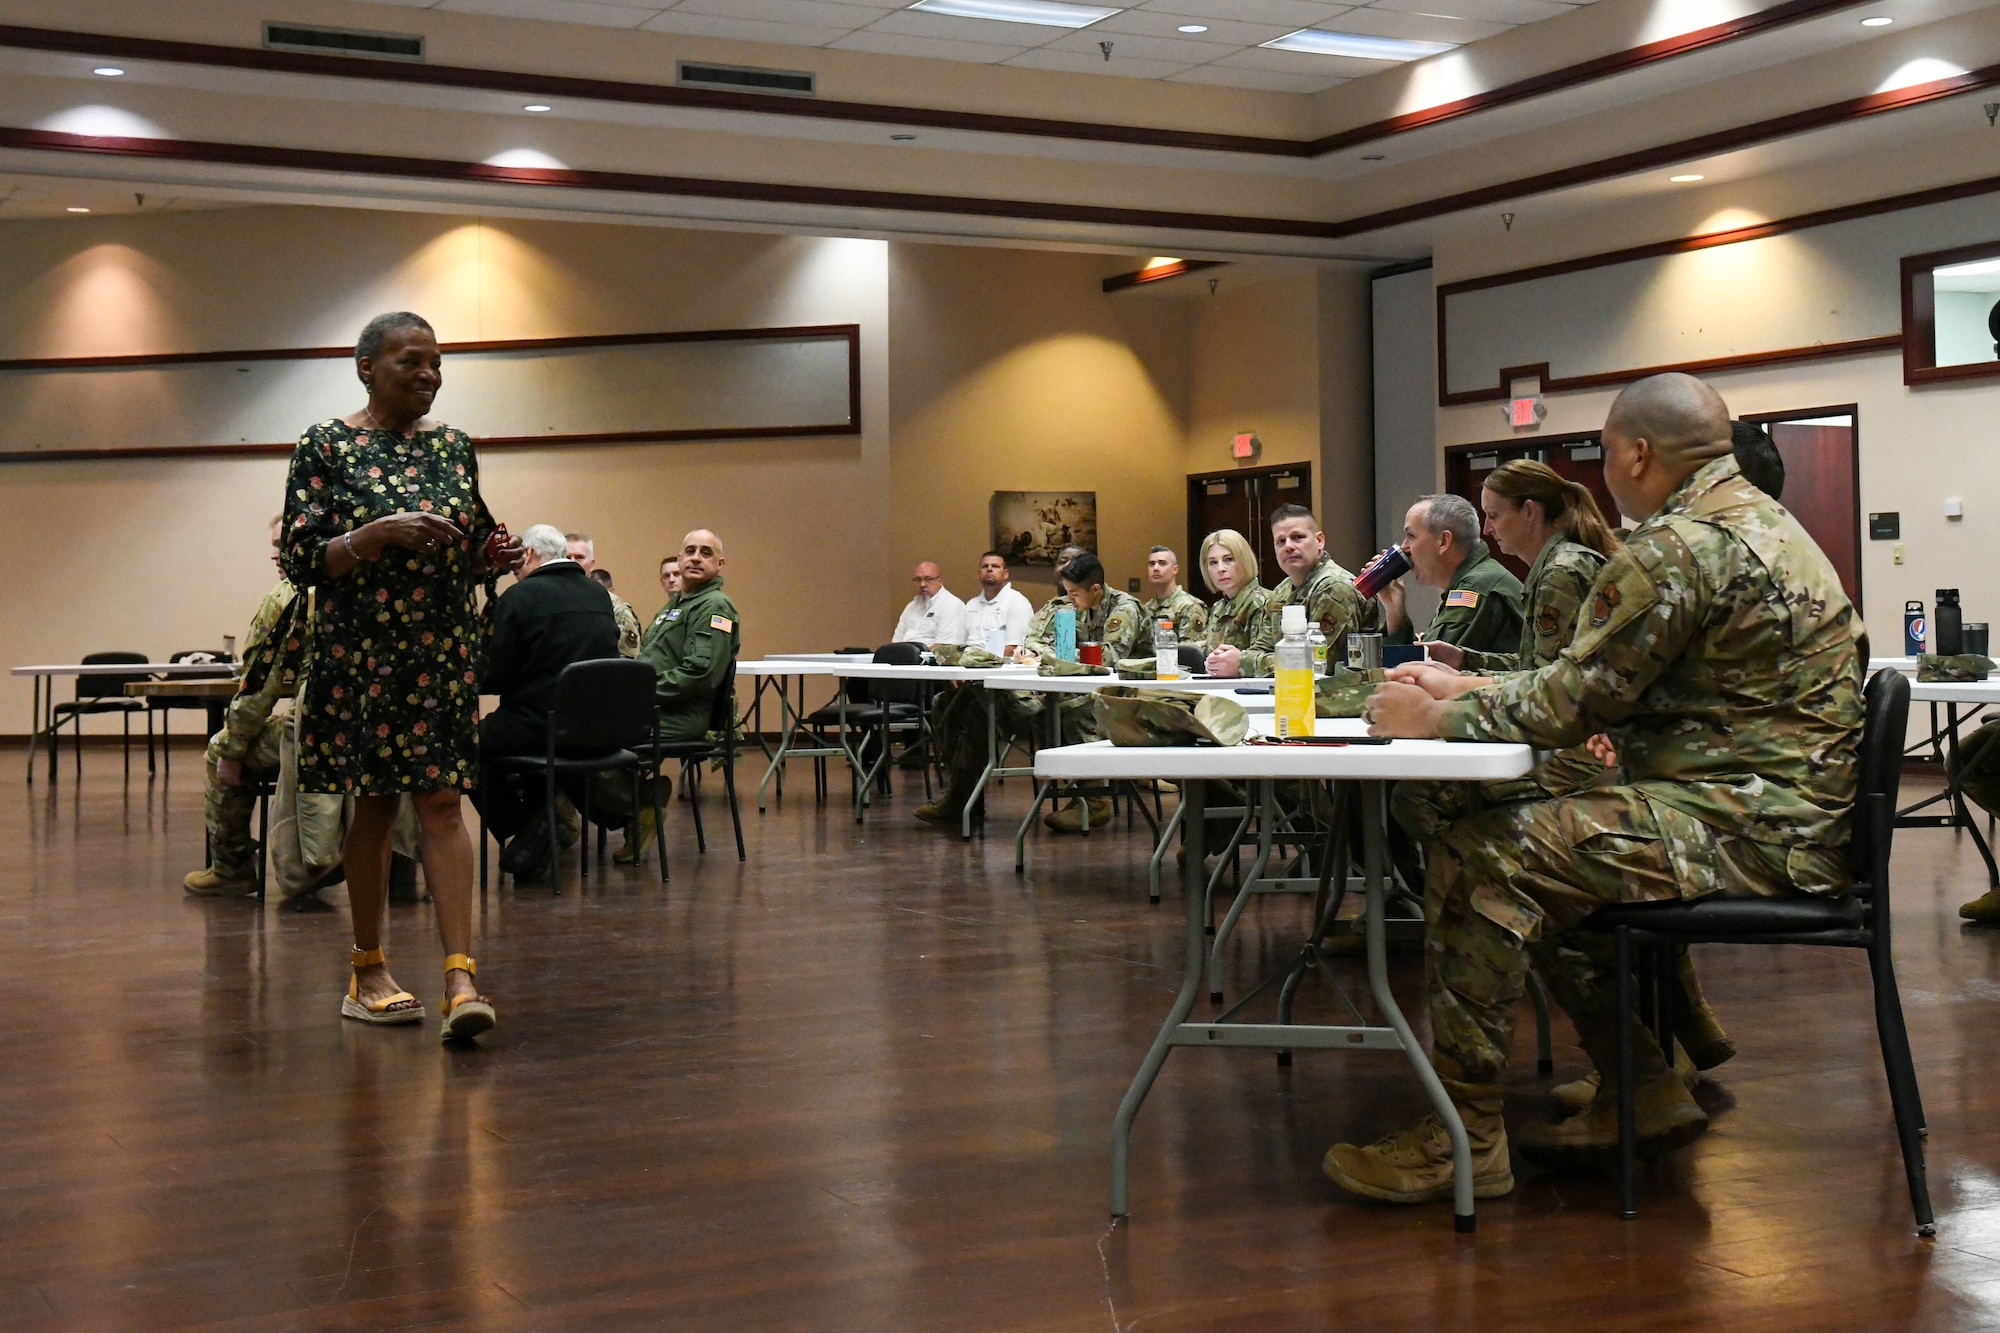 Mary Jernigan, 97th Air Mobility Wing (AMW) sexual assault prevention and response (SAPR) coordinator, explains the SAPR program to 97th AMW leaders at Altus Air Force Base, Oklahoma, April 7, 2022. Jernigan coordinates 24/7 victim care and case management for adult sexual assault victims. (U.S. Air Force photo by Airman 1st Class Trenton Jancze)